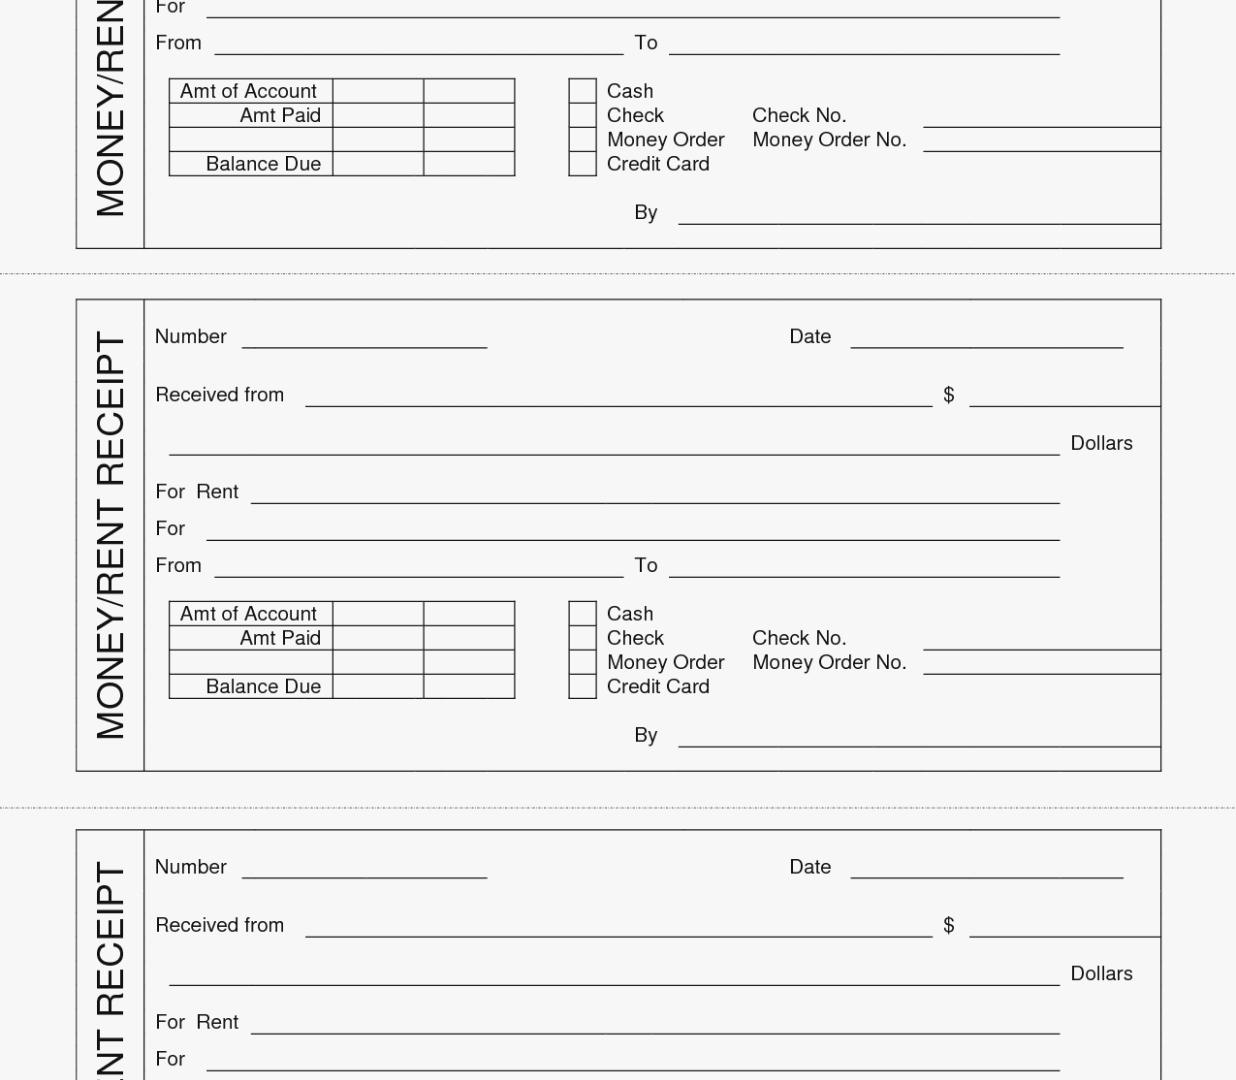 Free Fillable Rent Receipt Lovely General Free Fillable Rent Receipt Resume Templates Sales